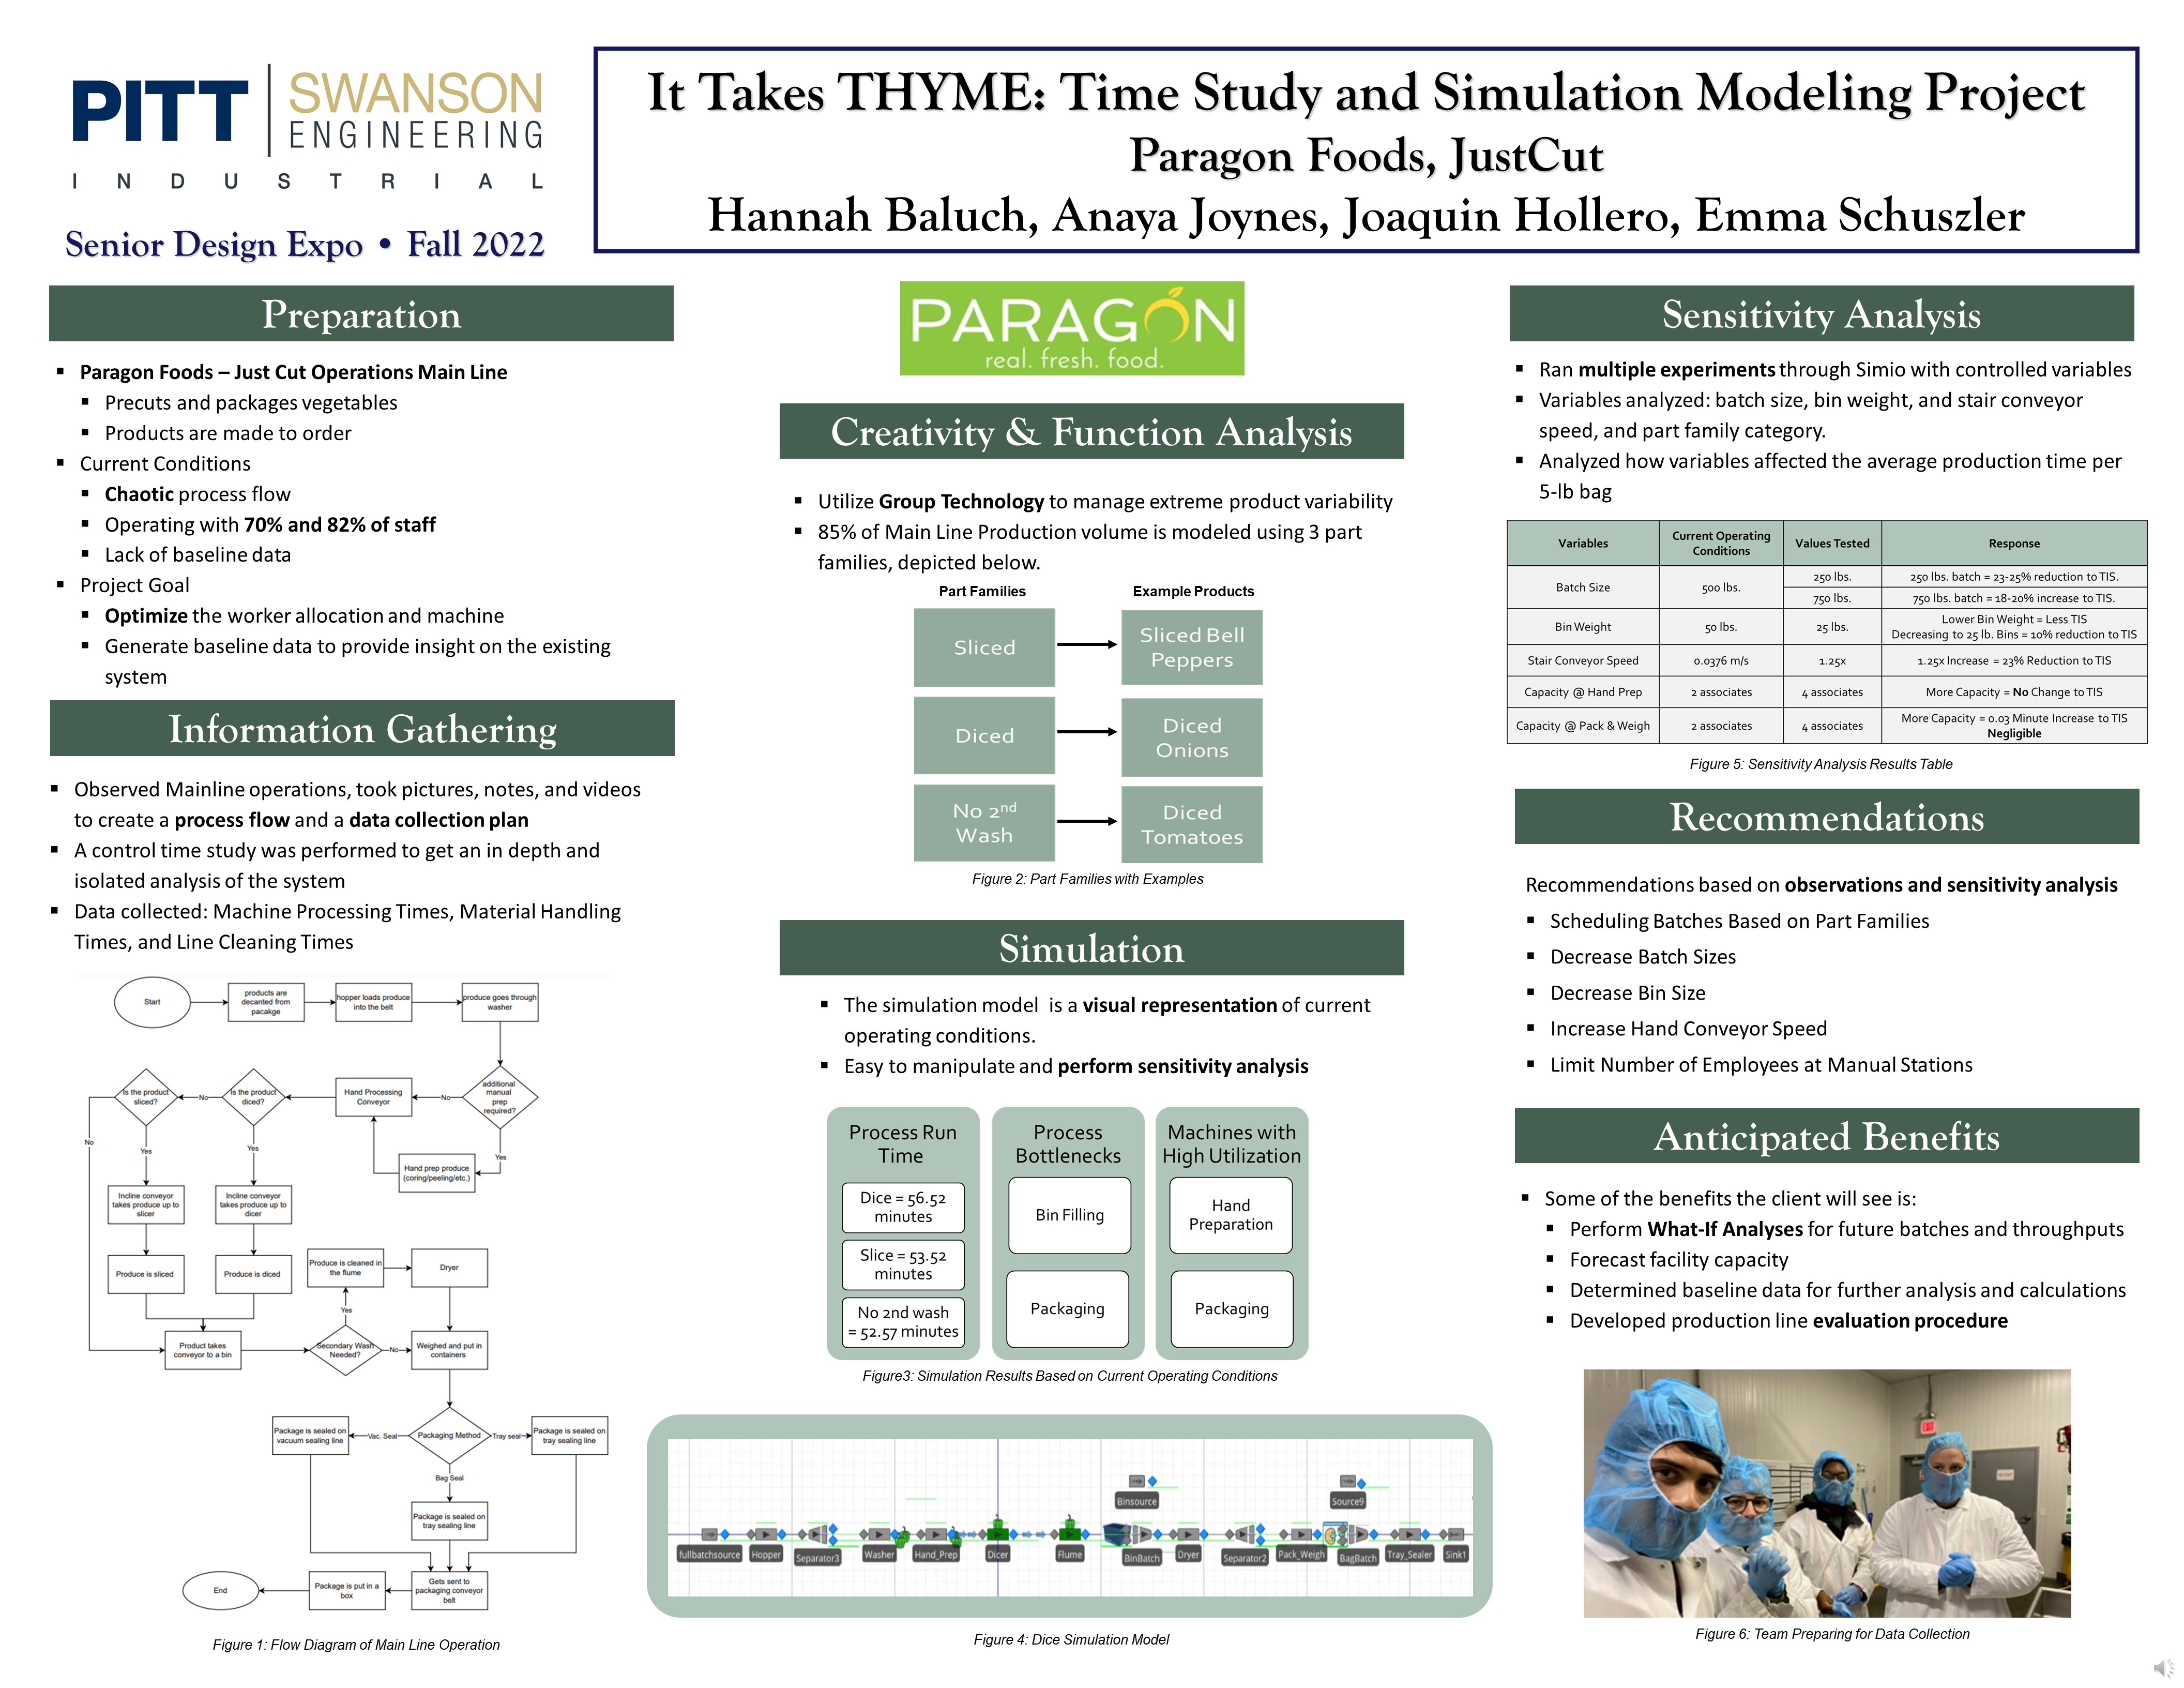 It Takes THYME: Time Study and Simulation Modeling Project research poster